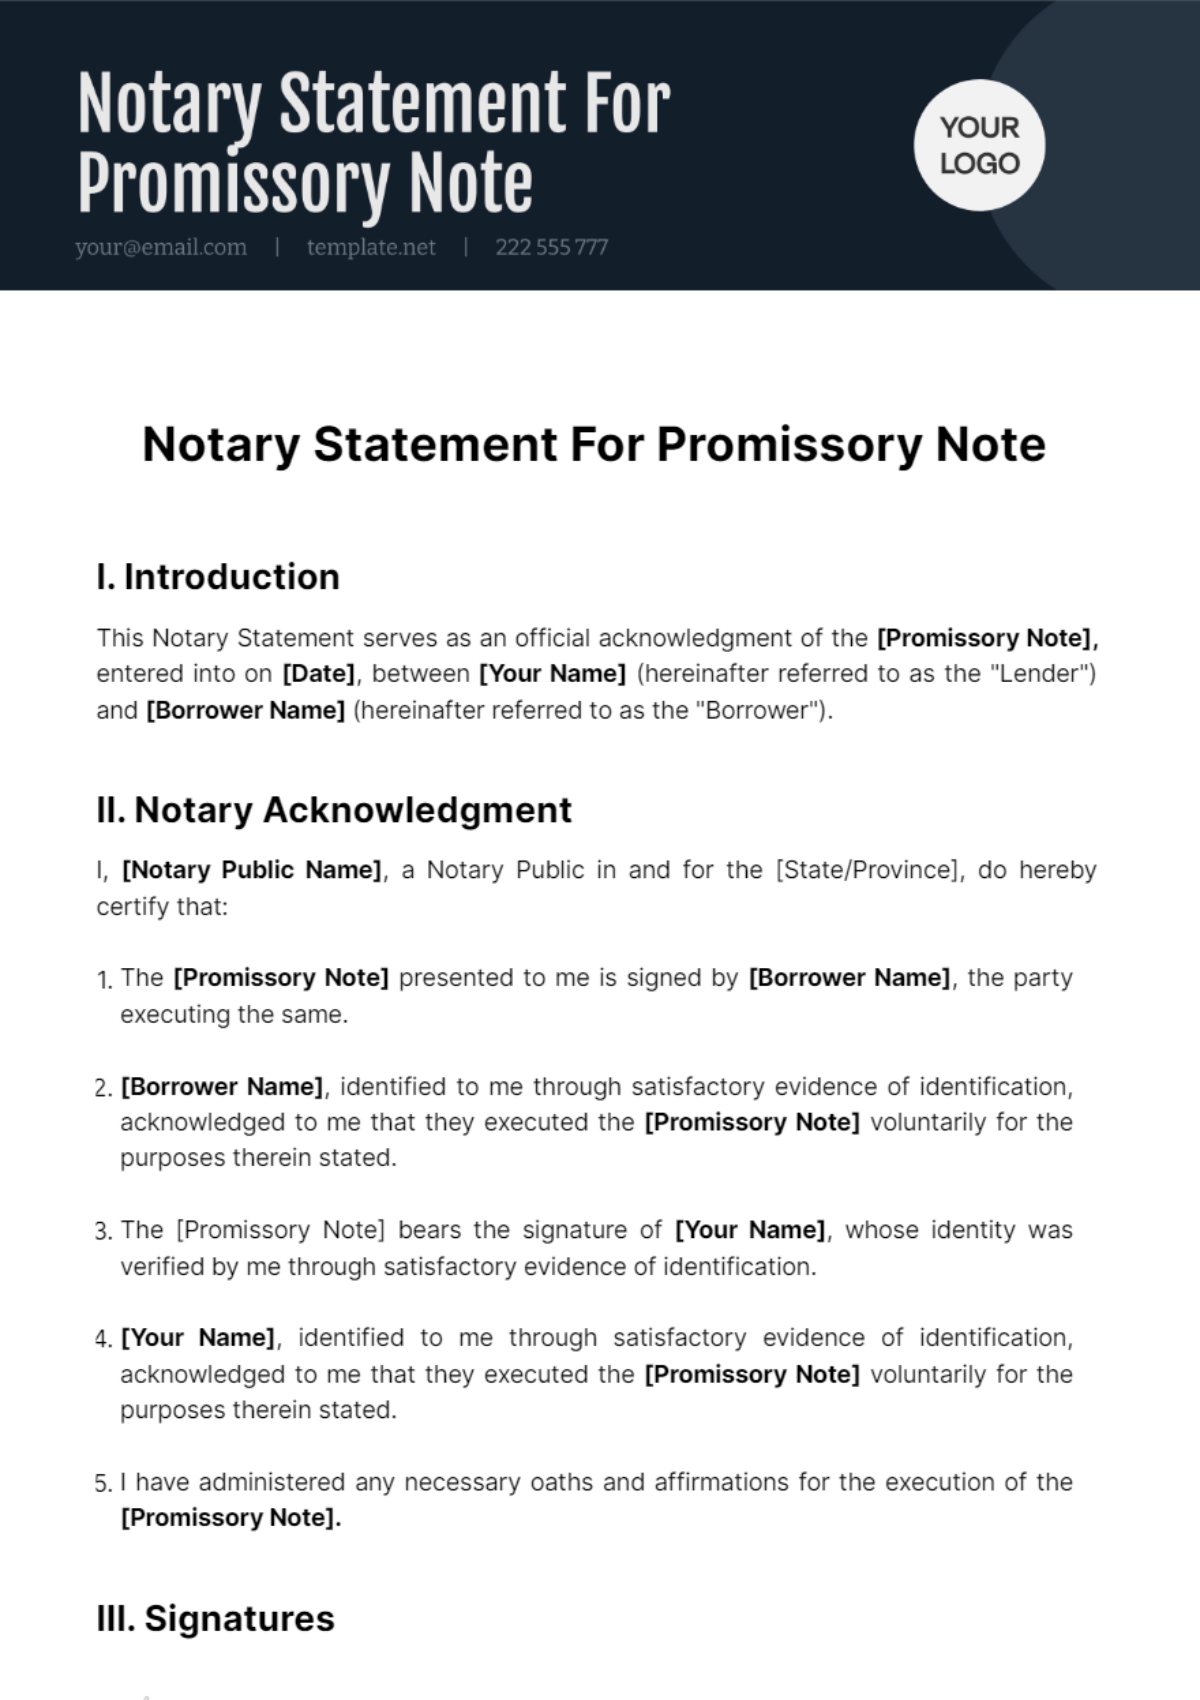 Free Notary Statement For Promissory Note Template